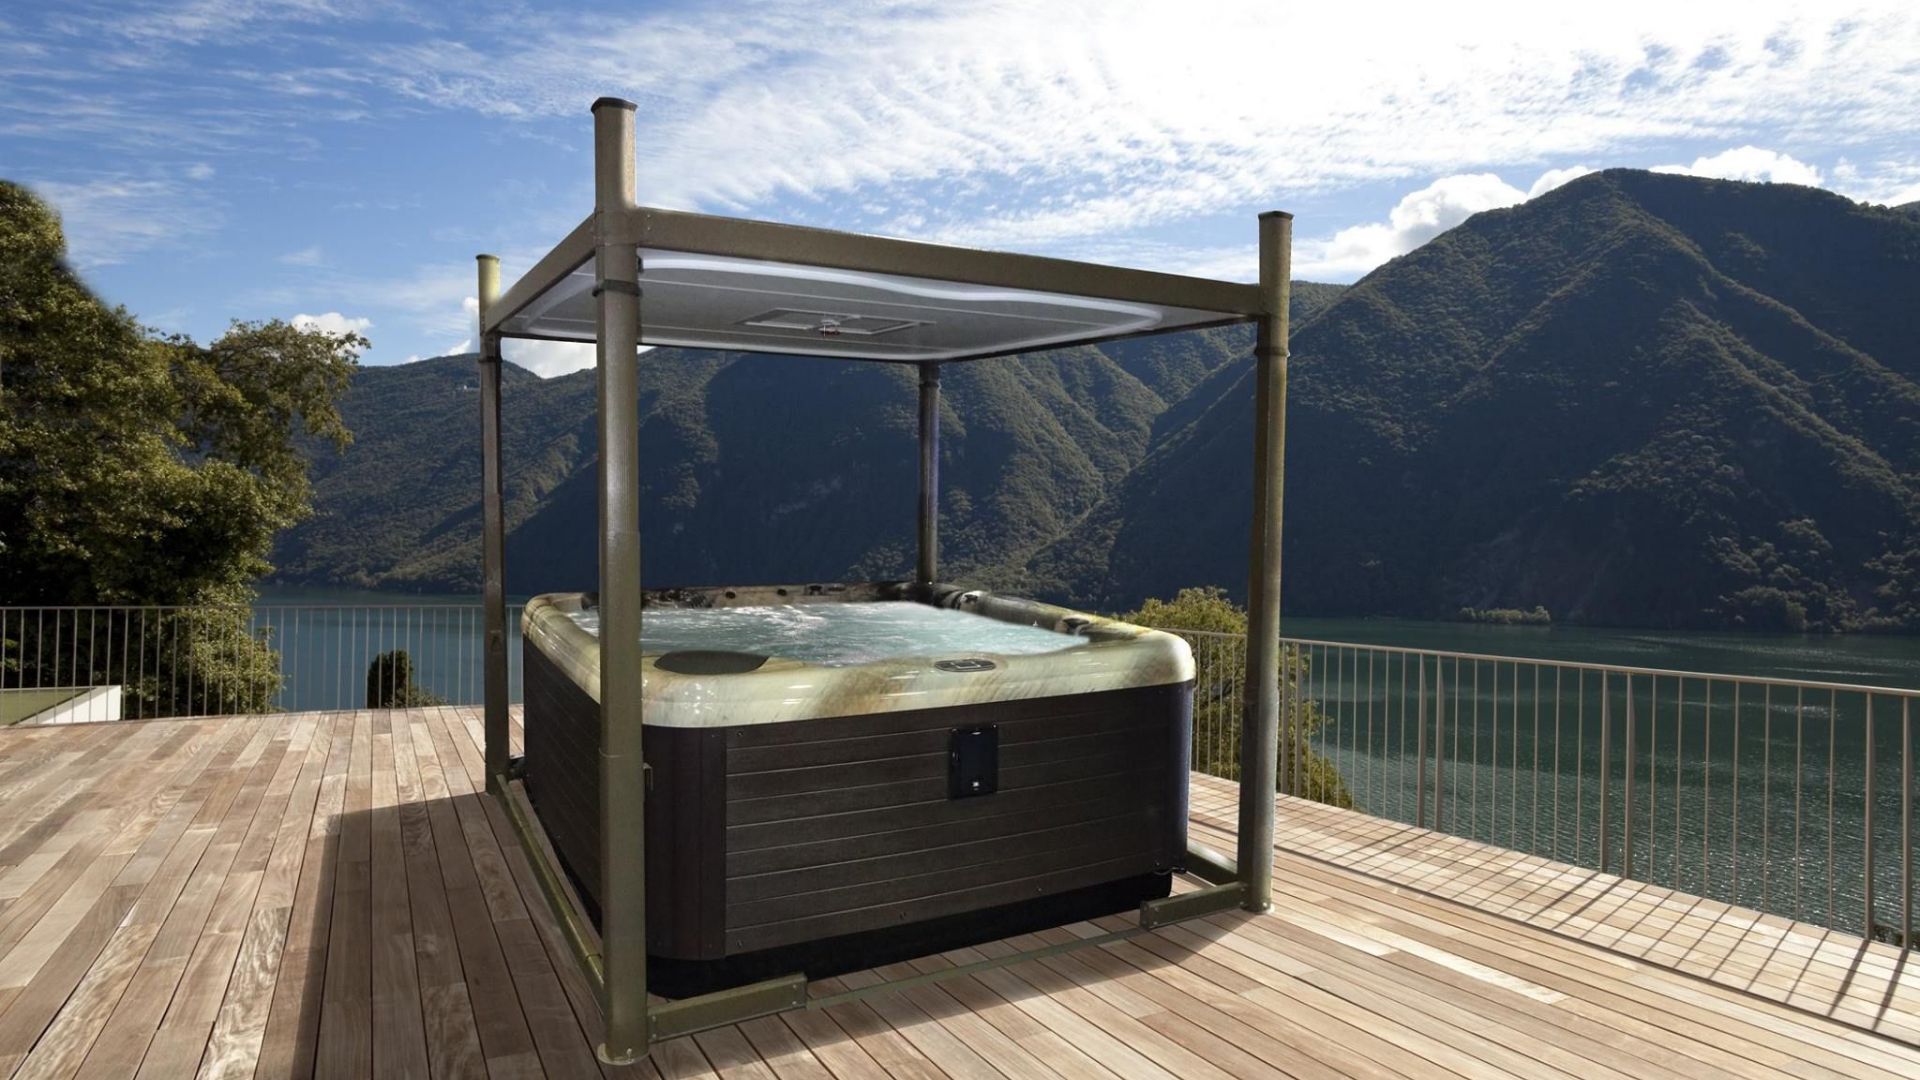 covana cover over a hot tub by a lake in the mountains